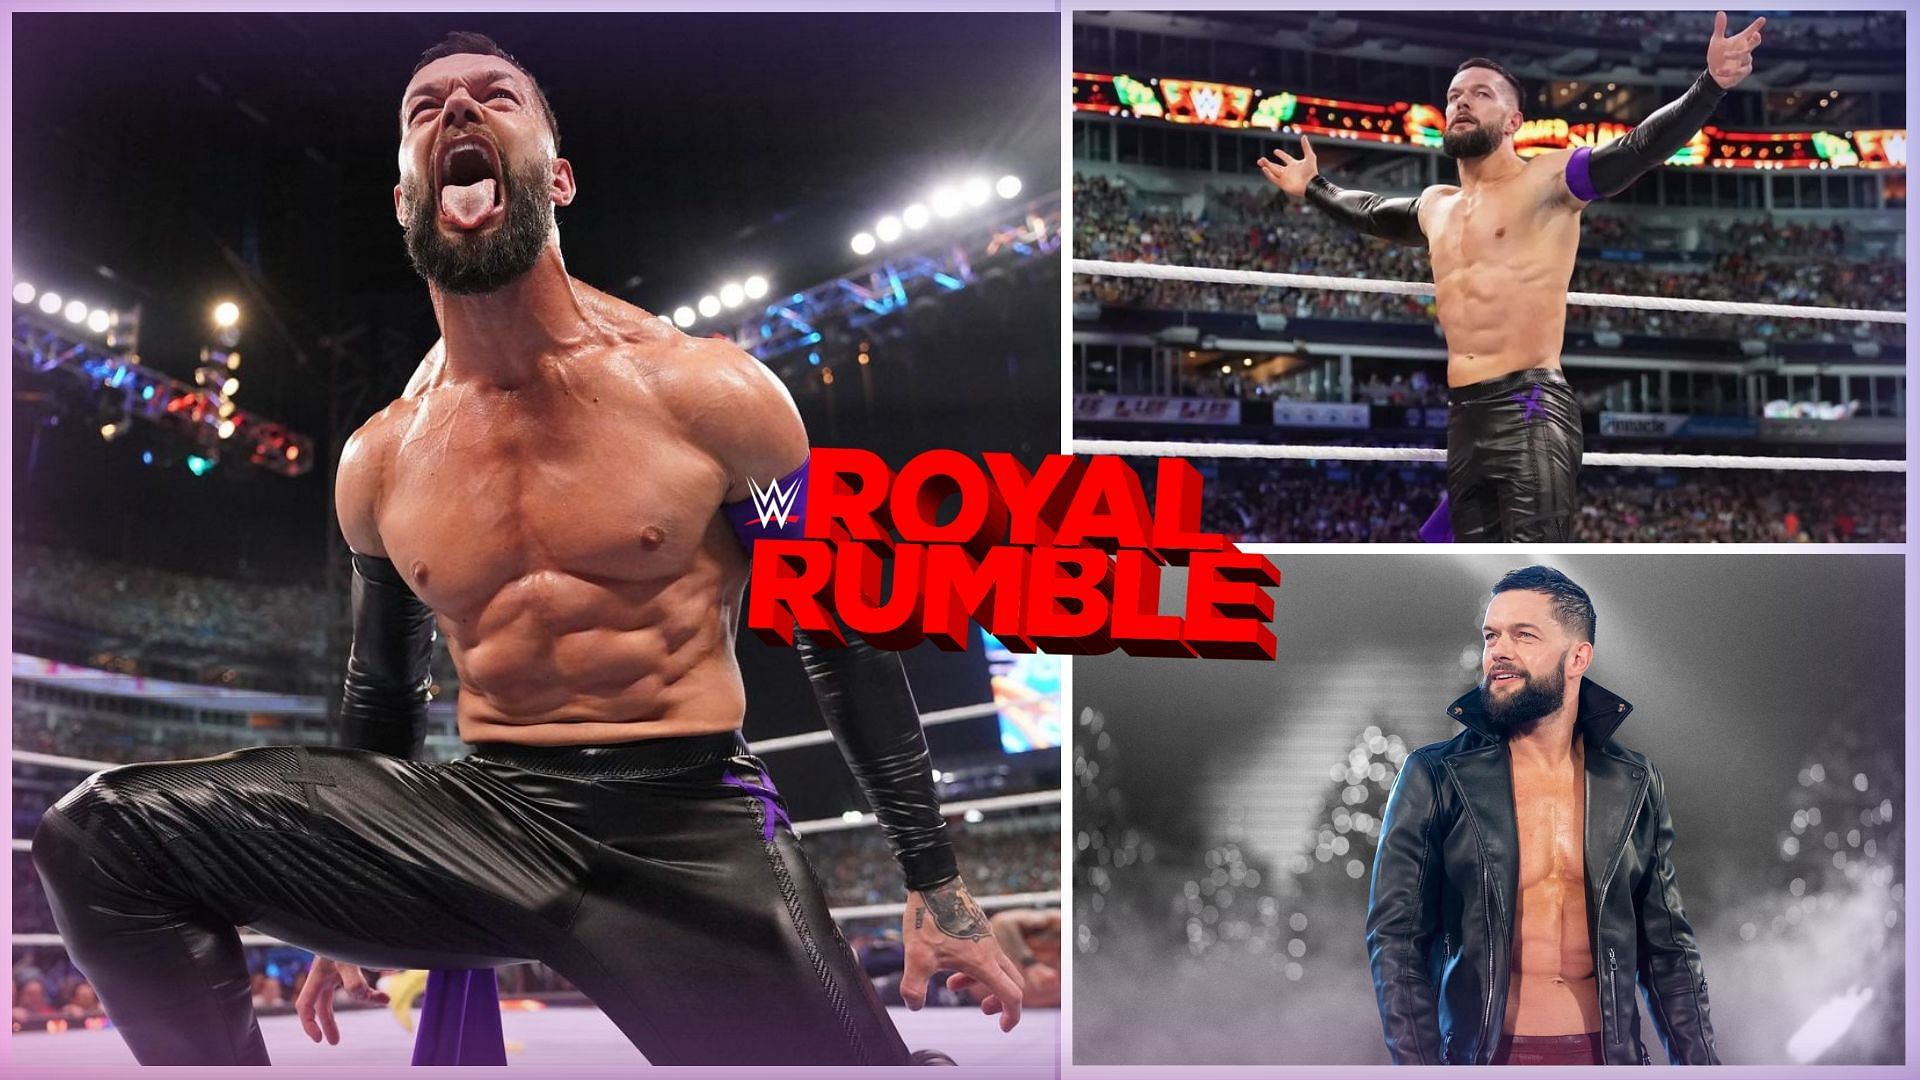 Finn Balor appears to have specific plans ready for the Royal Rumble